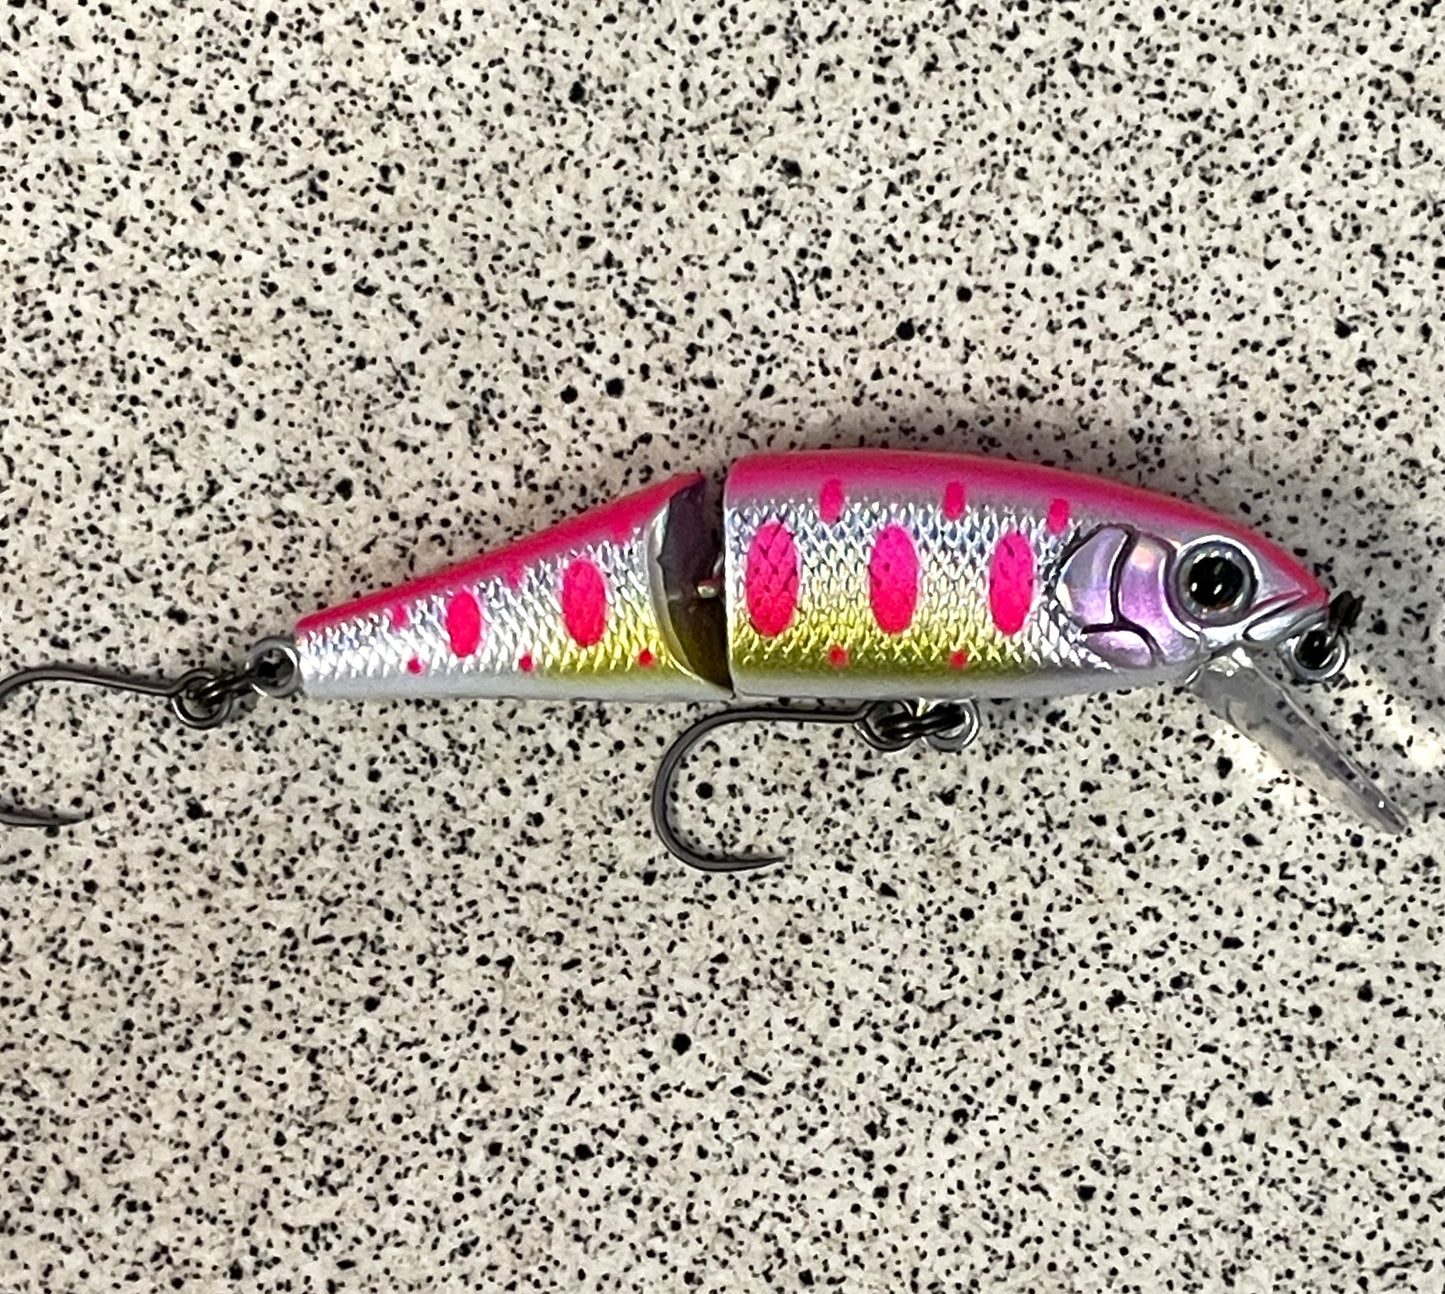 Tackle House Buffet Jointed 51S - #03 Pink Yamame